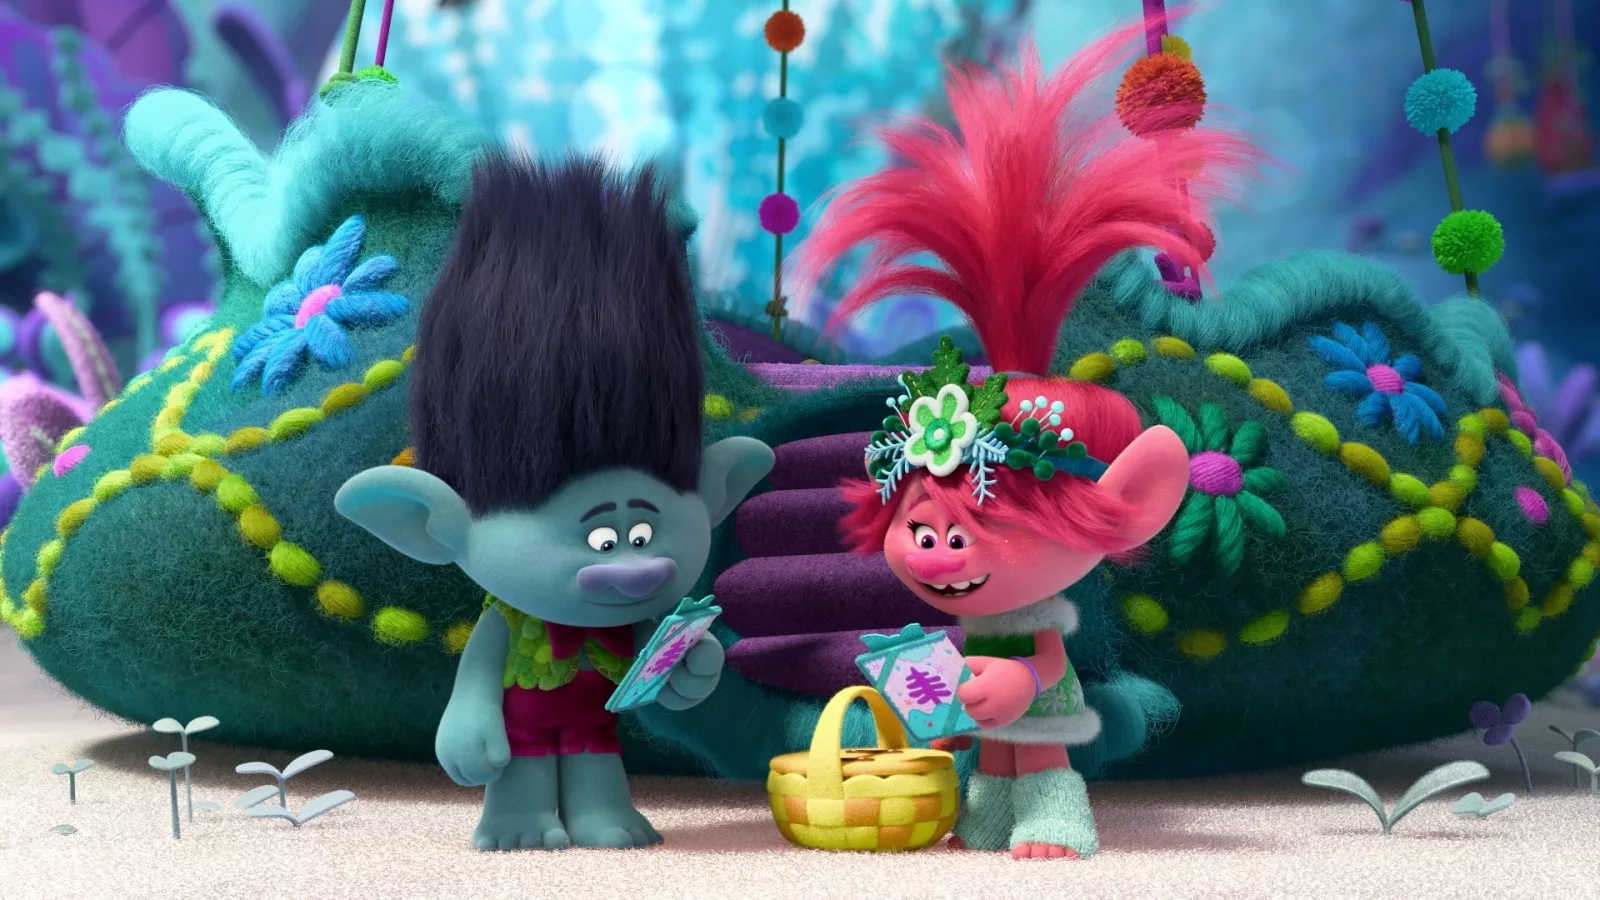 Trolls Holiday in Harmony gets a trailer and poster